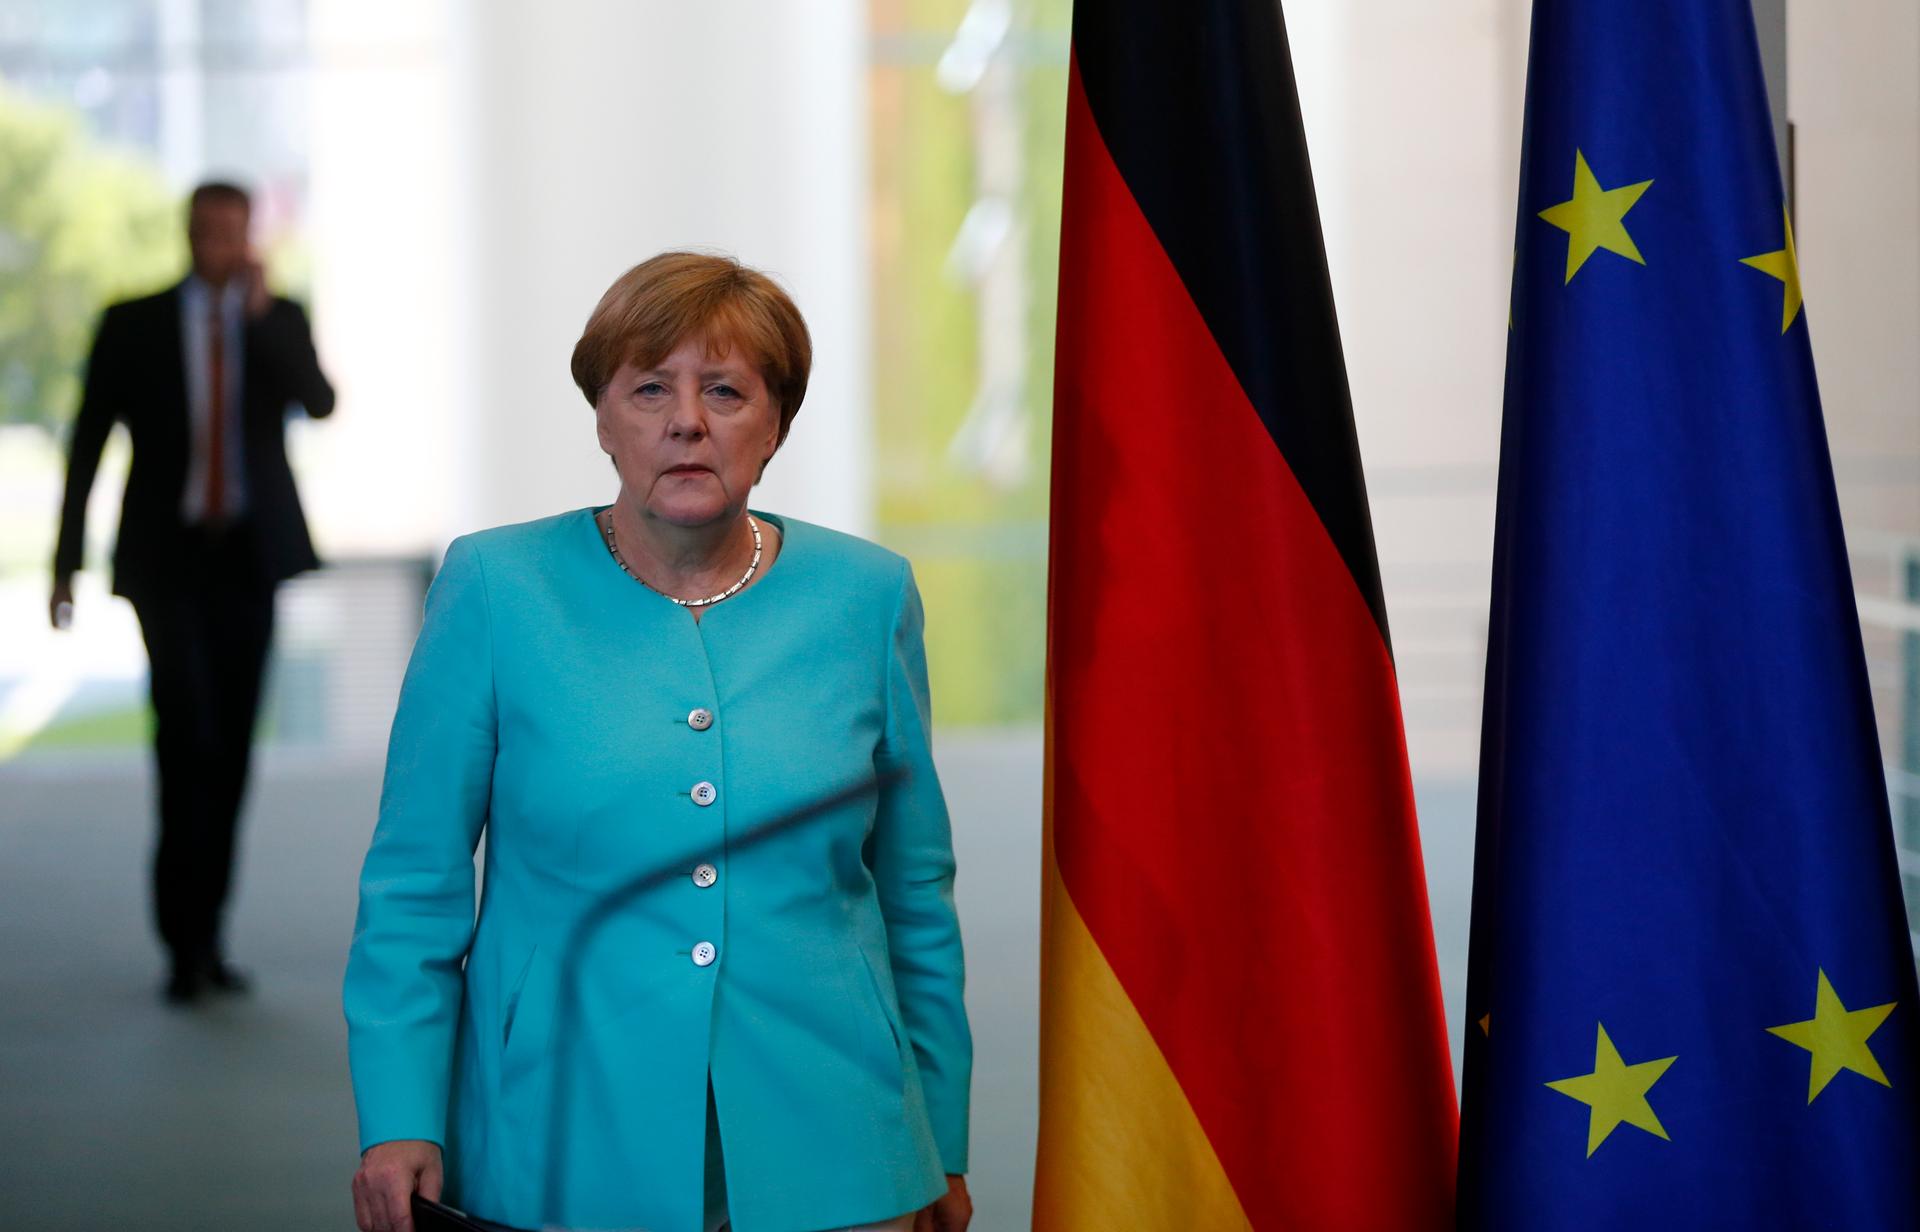 German Chancellor Angela Merkel arrives for a statement in Berlin after Britain voted to leave the European Union.